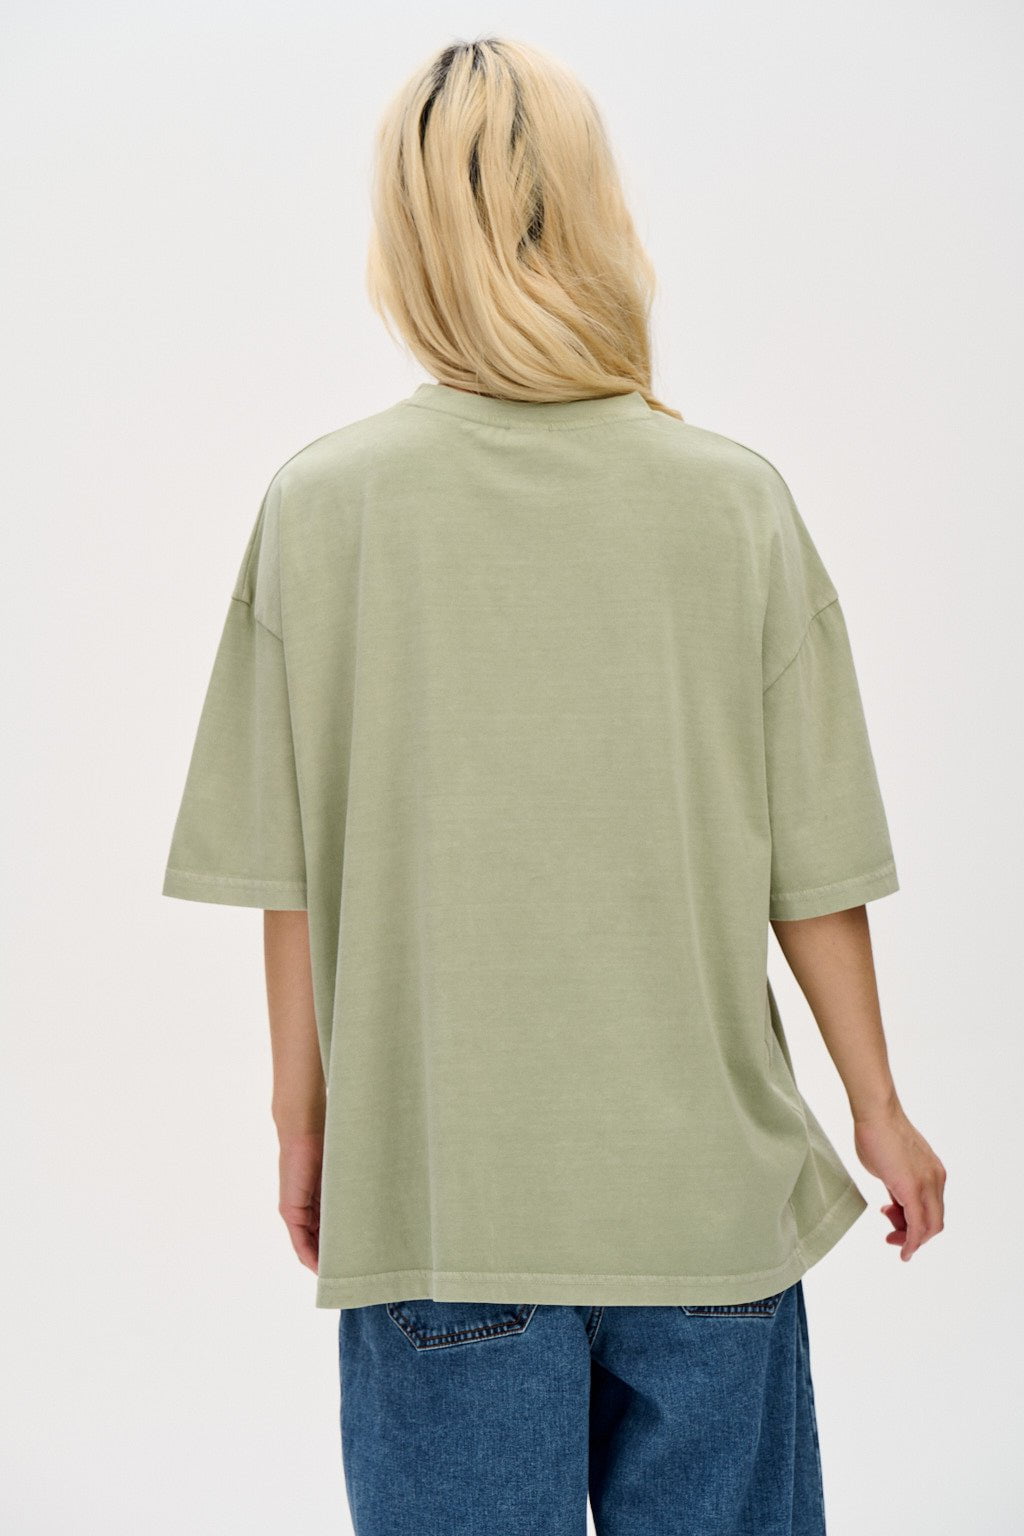 Lucy & Yak Tops Benny Tee: ORGANIC COTTON EARTH PIGMENT- Stone Green